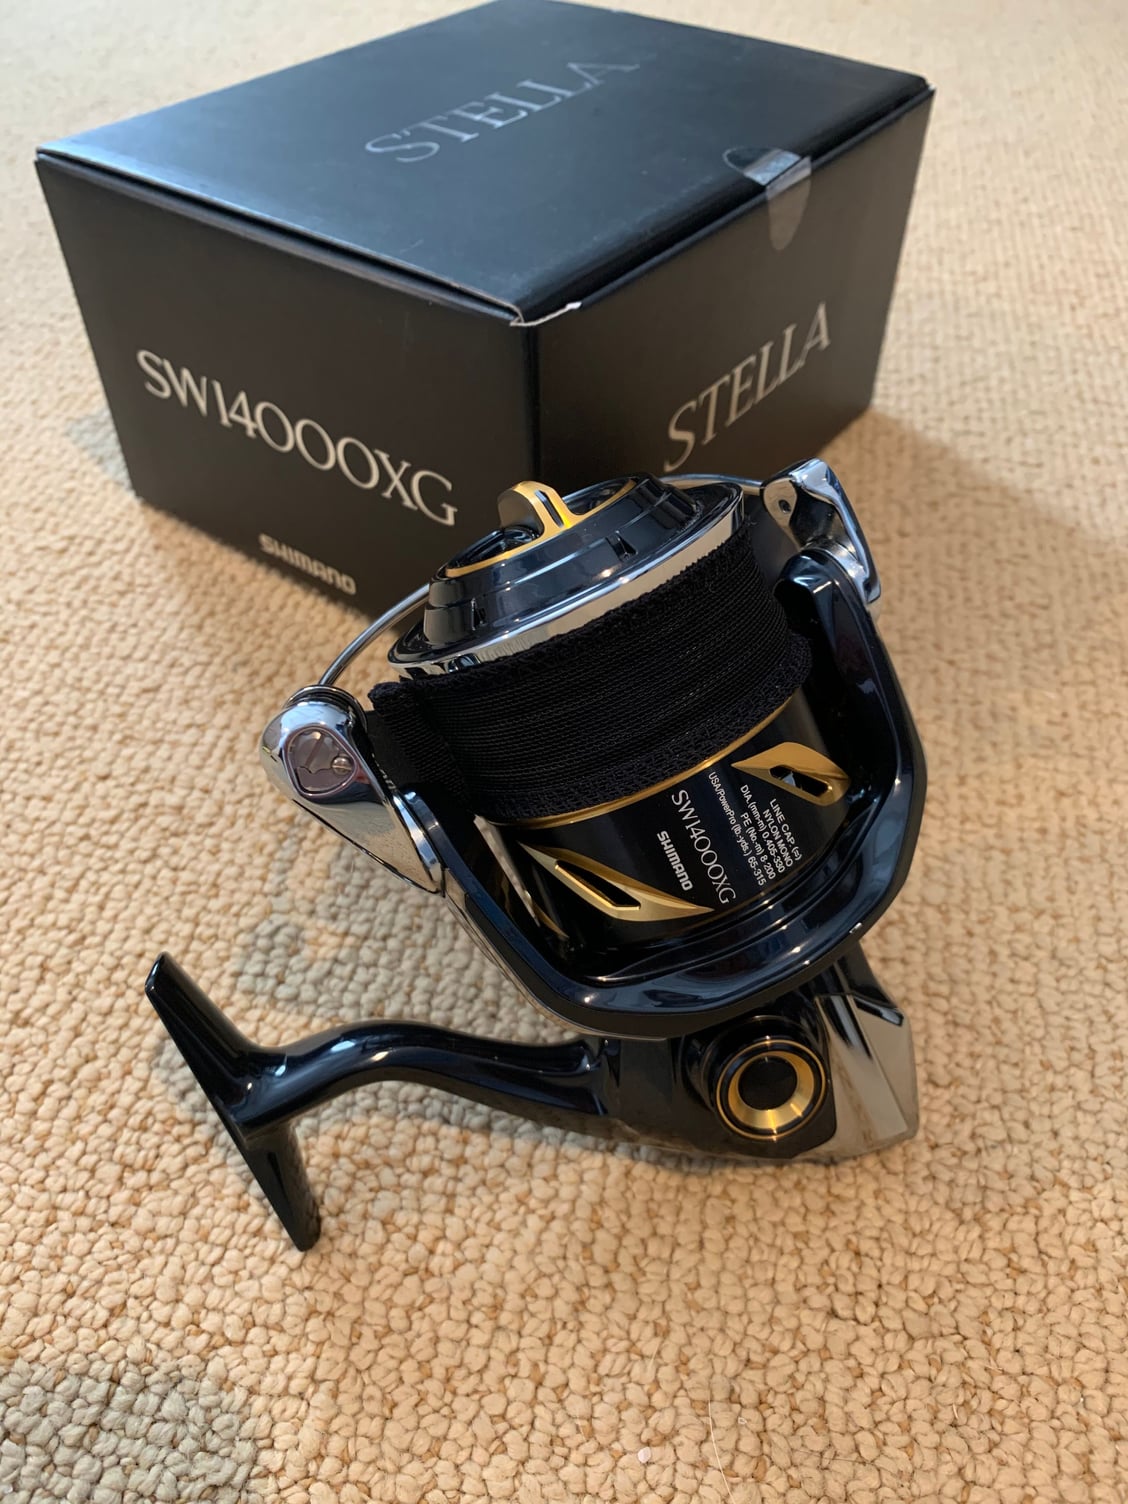 SOLD !WTS 2020 Shimano Stella 14000XG - The Hull Truth - Boating and  Fishing Forum